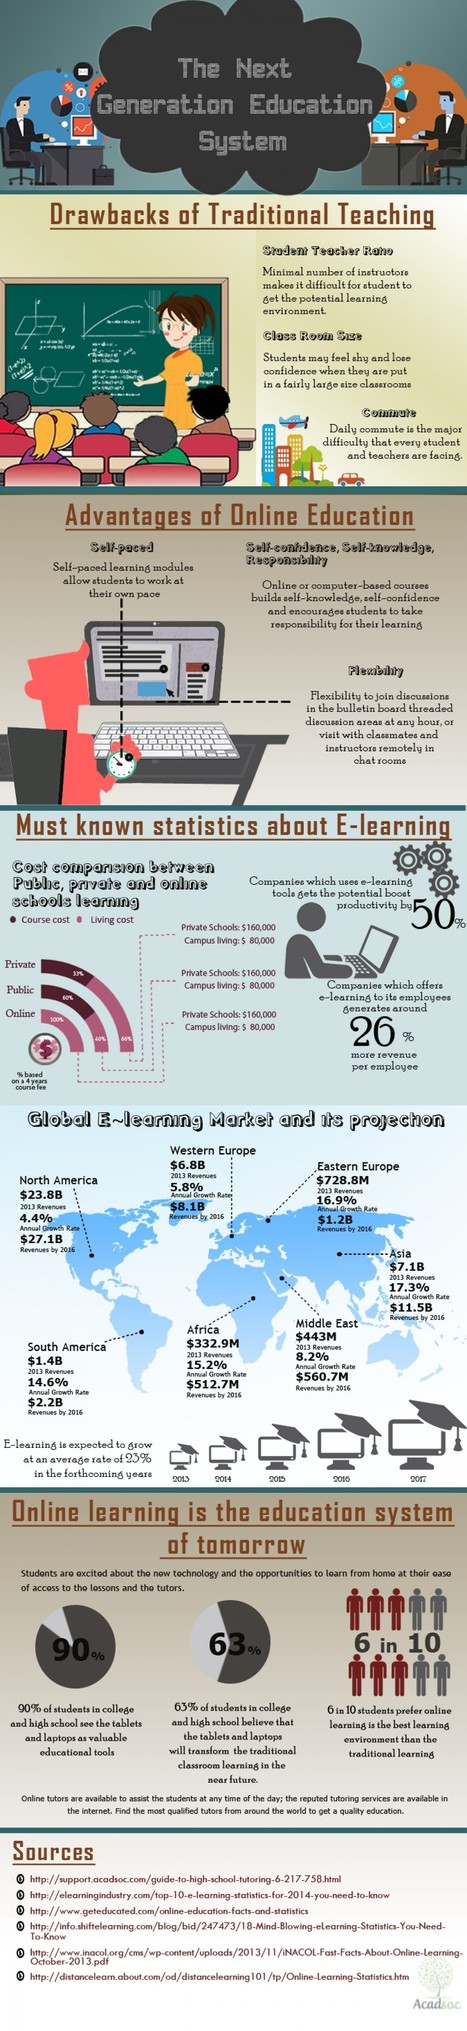 The next generation of education system [Infographic] | Didactics and Technology in Education | Scoop.it